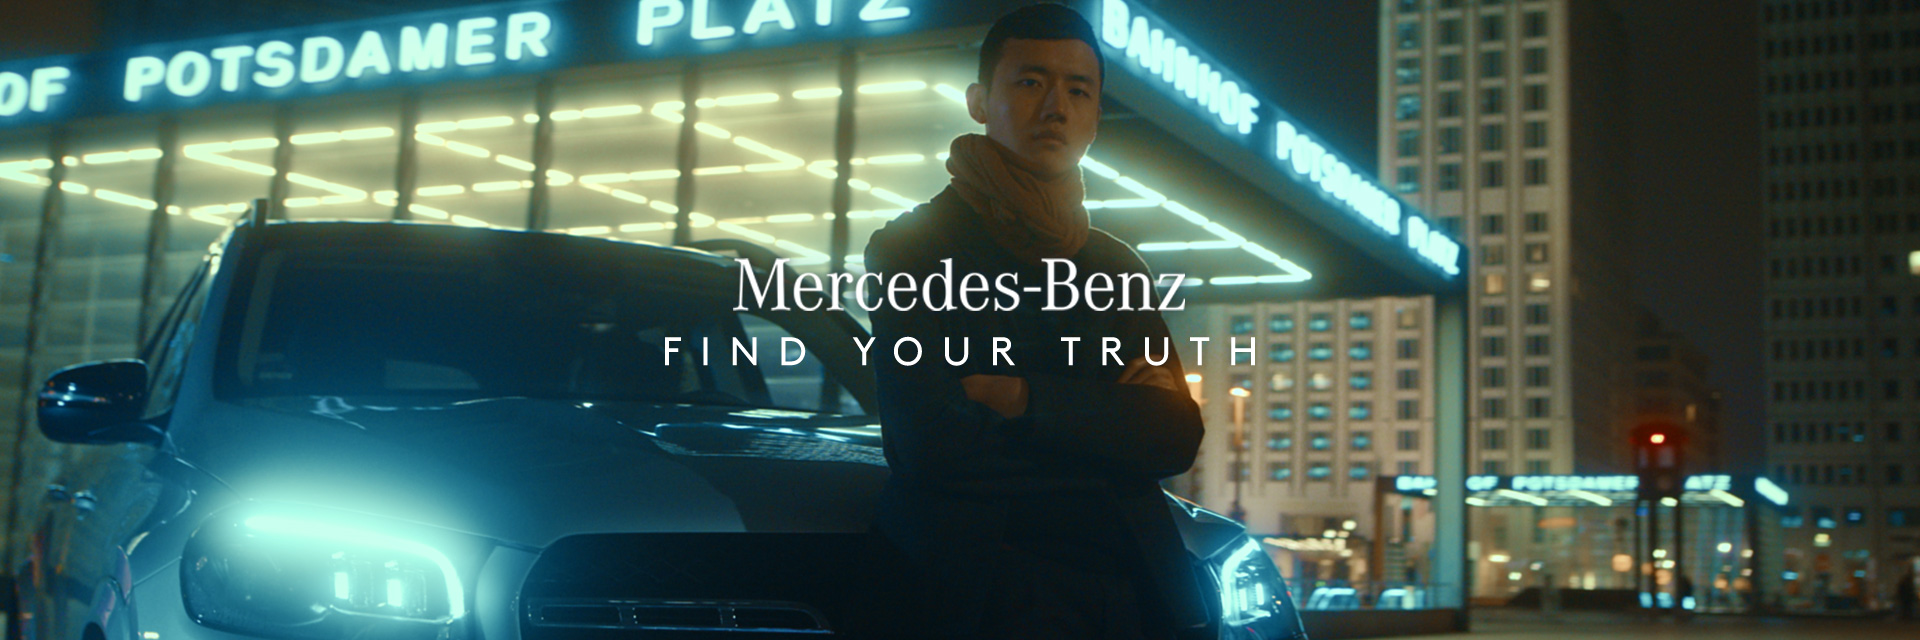 FIND YOUR TRUTH – MERCEDES BENZ